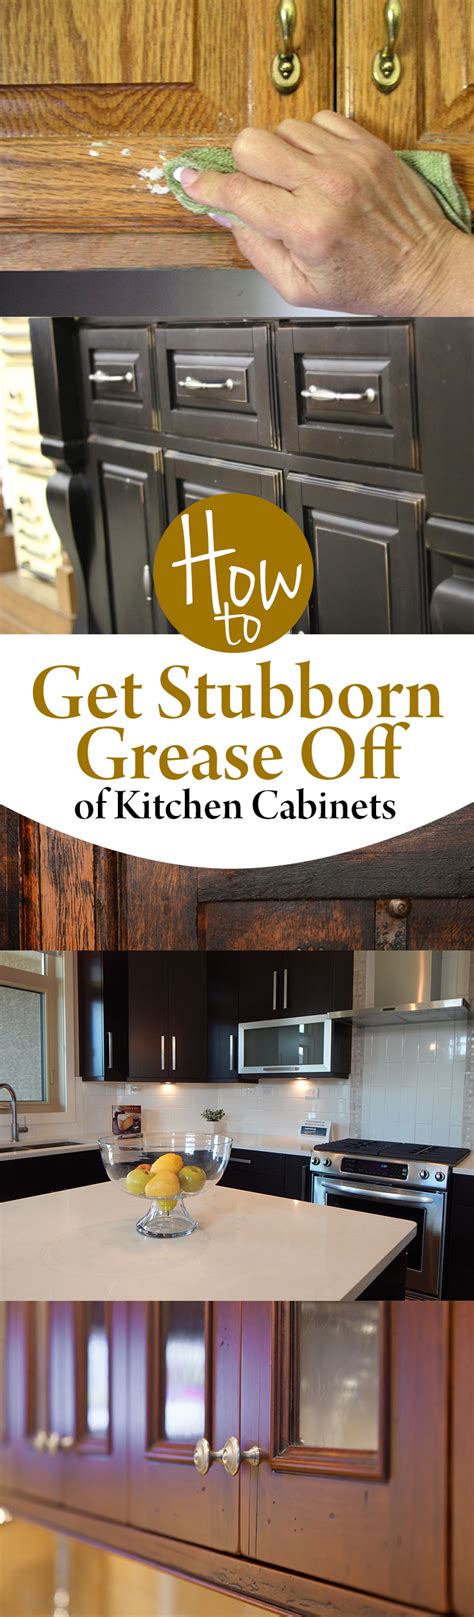 I eagerly decided to give it a try it on my gunky kitchen cabinets! How to Get Stubborn Grease Off of Kitchen Cabinets - Wrapped in Rust